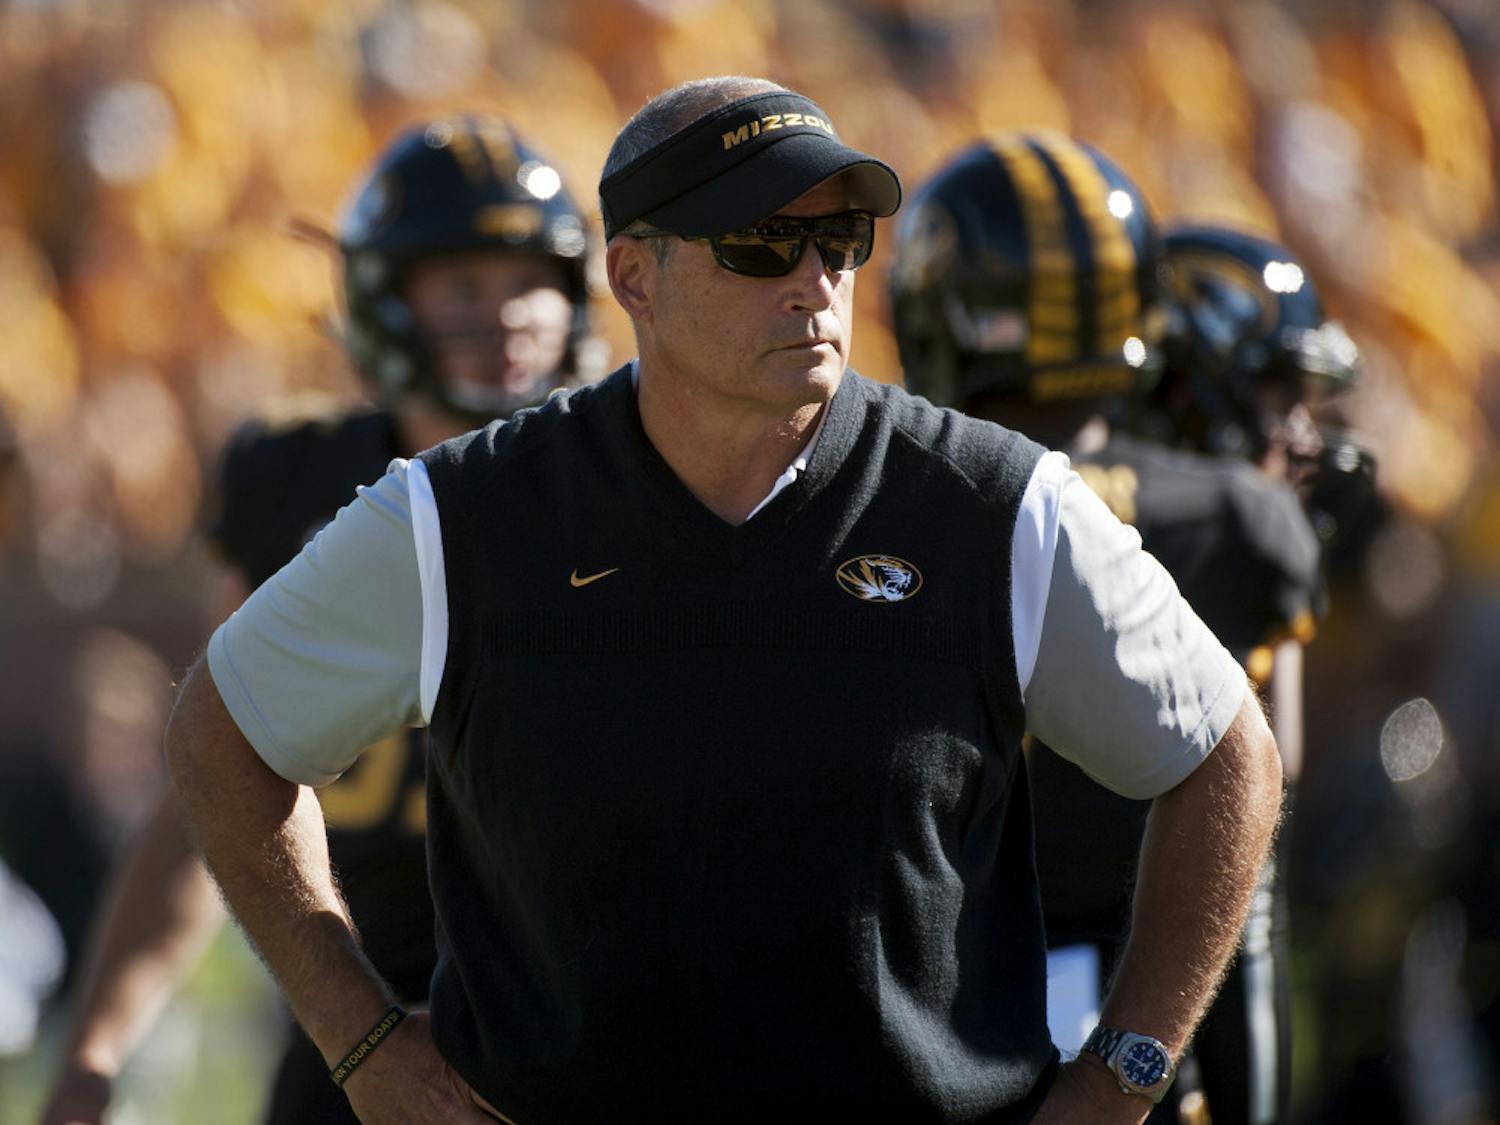 Missouri head coach Gary Pinkel watches his team warm up before the start of an NCAA college football game against Connecticut Saturday, Sept. 19, 2015, in Columbia, Mo. (AP Photo/L.G. Patterson)